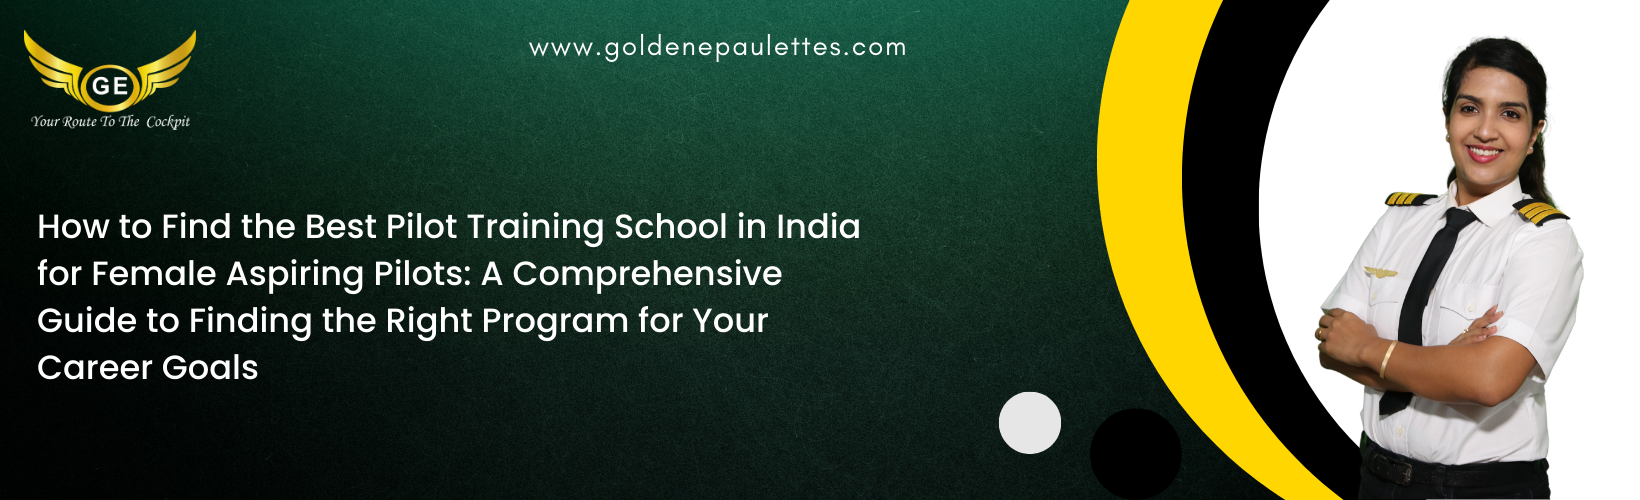 How to Choose the Right Pilot Training School in India